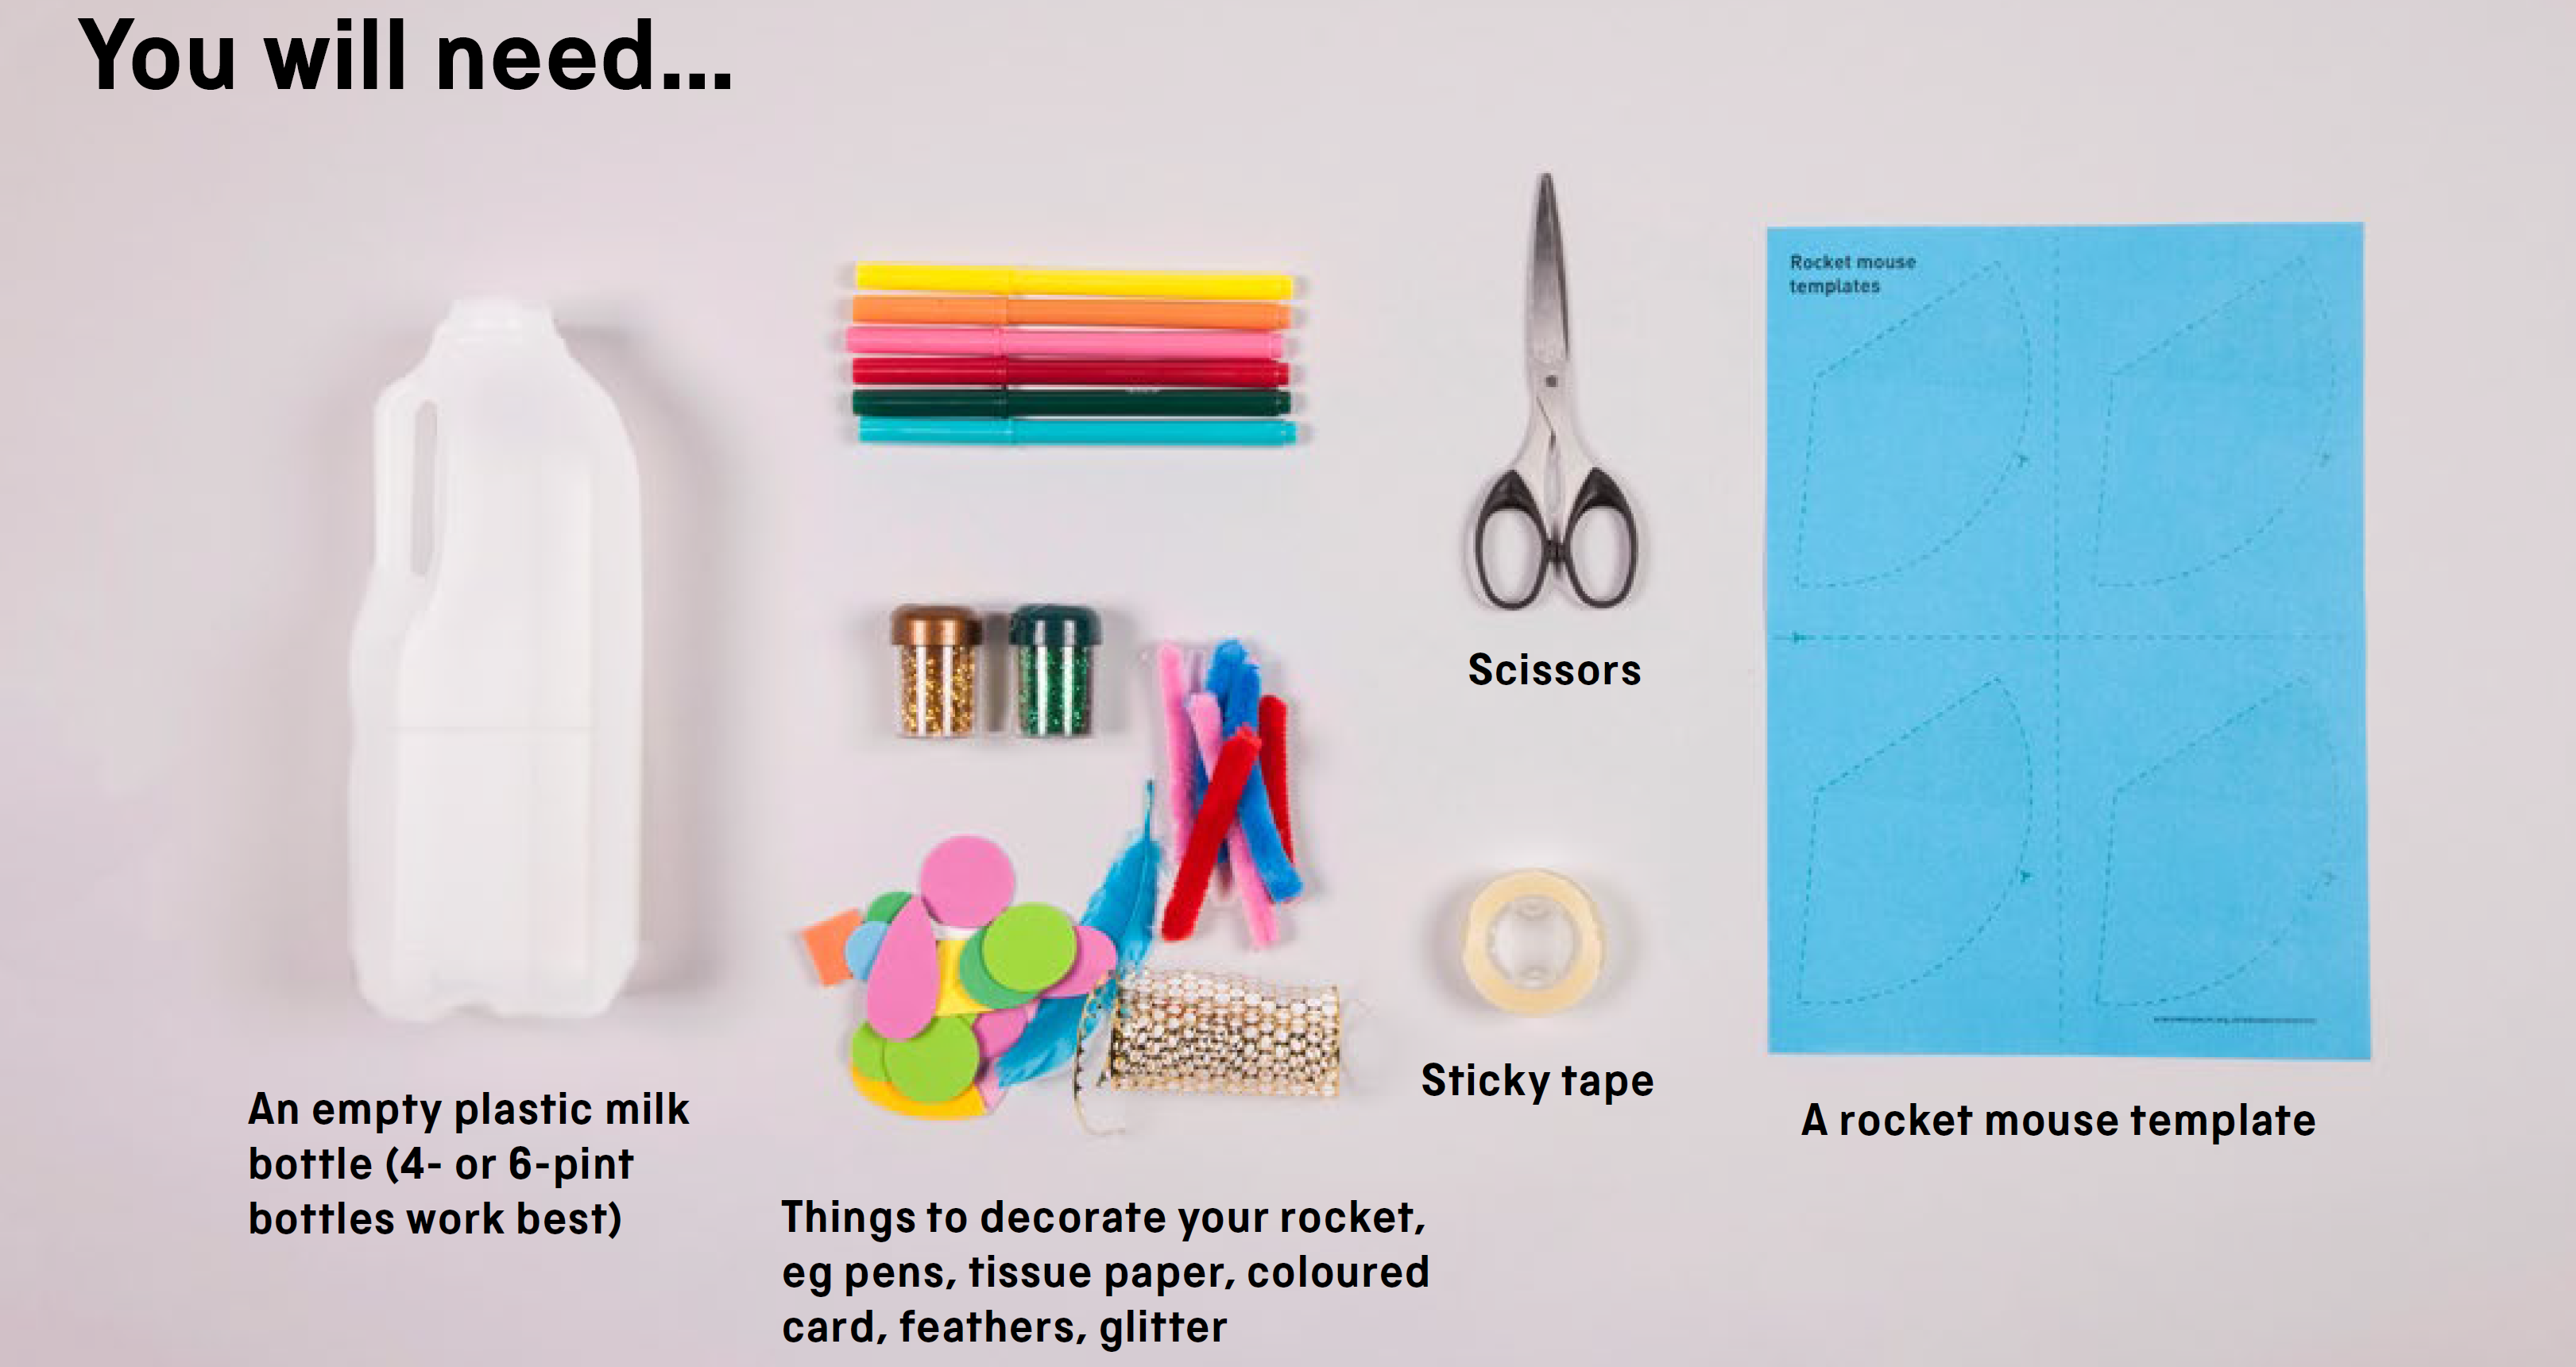 You will need: an empty plastic milk bottle ( 4- or 6- pint bottles work best), things to decorate your rocket, scissors, sticky tape and a rocket mouse template.